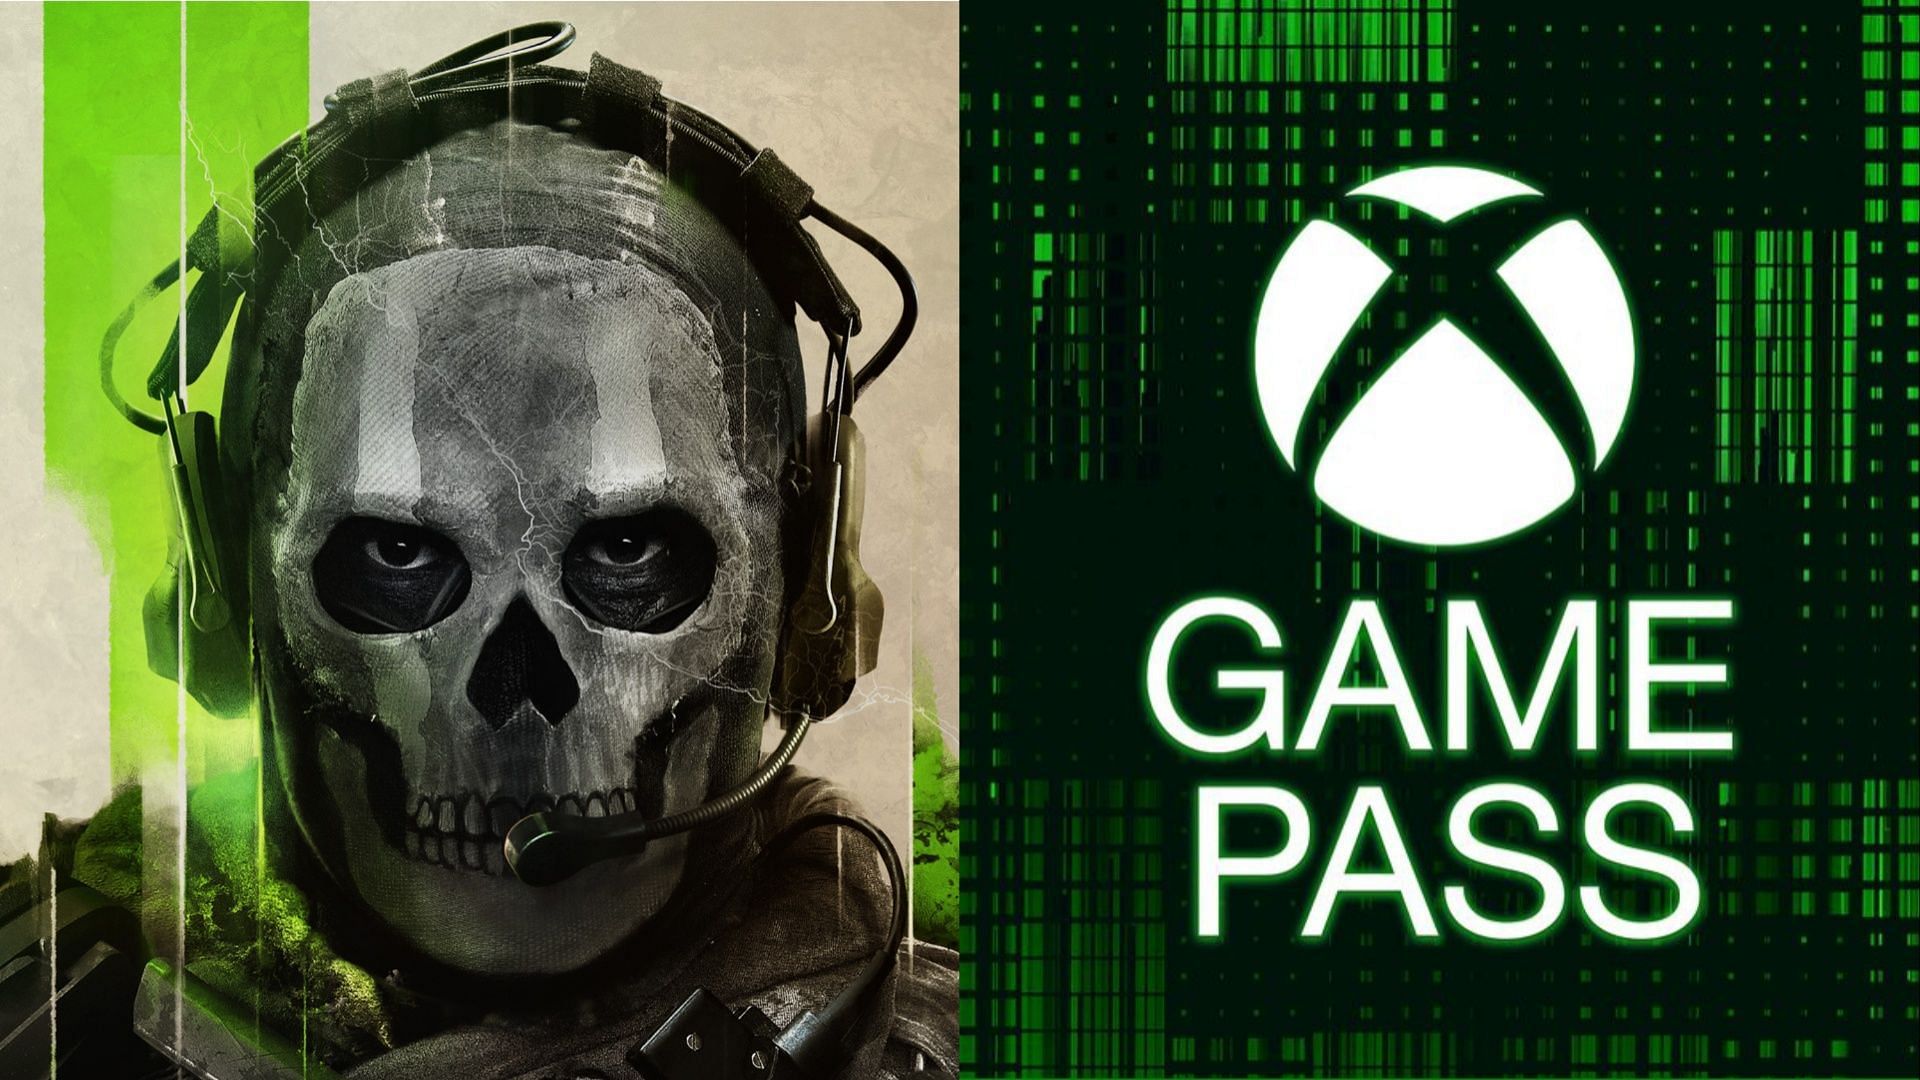 Microsoft Activision deal: Blizzard games list, Ubisoft cloud gaming - will  Call of Duty come to Game Pass?